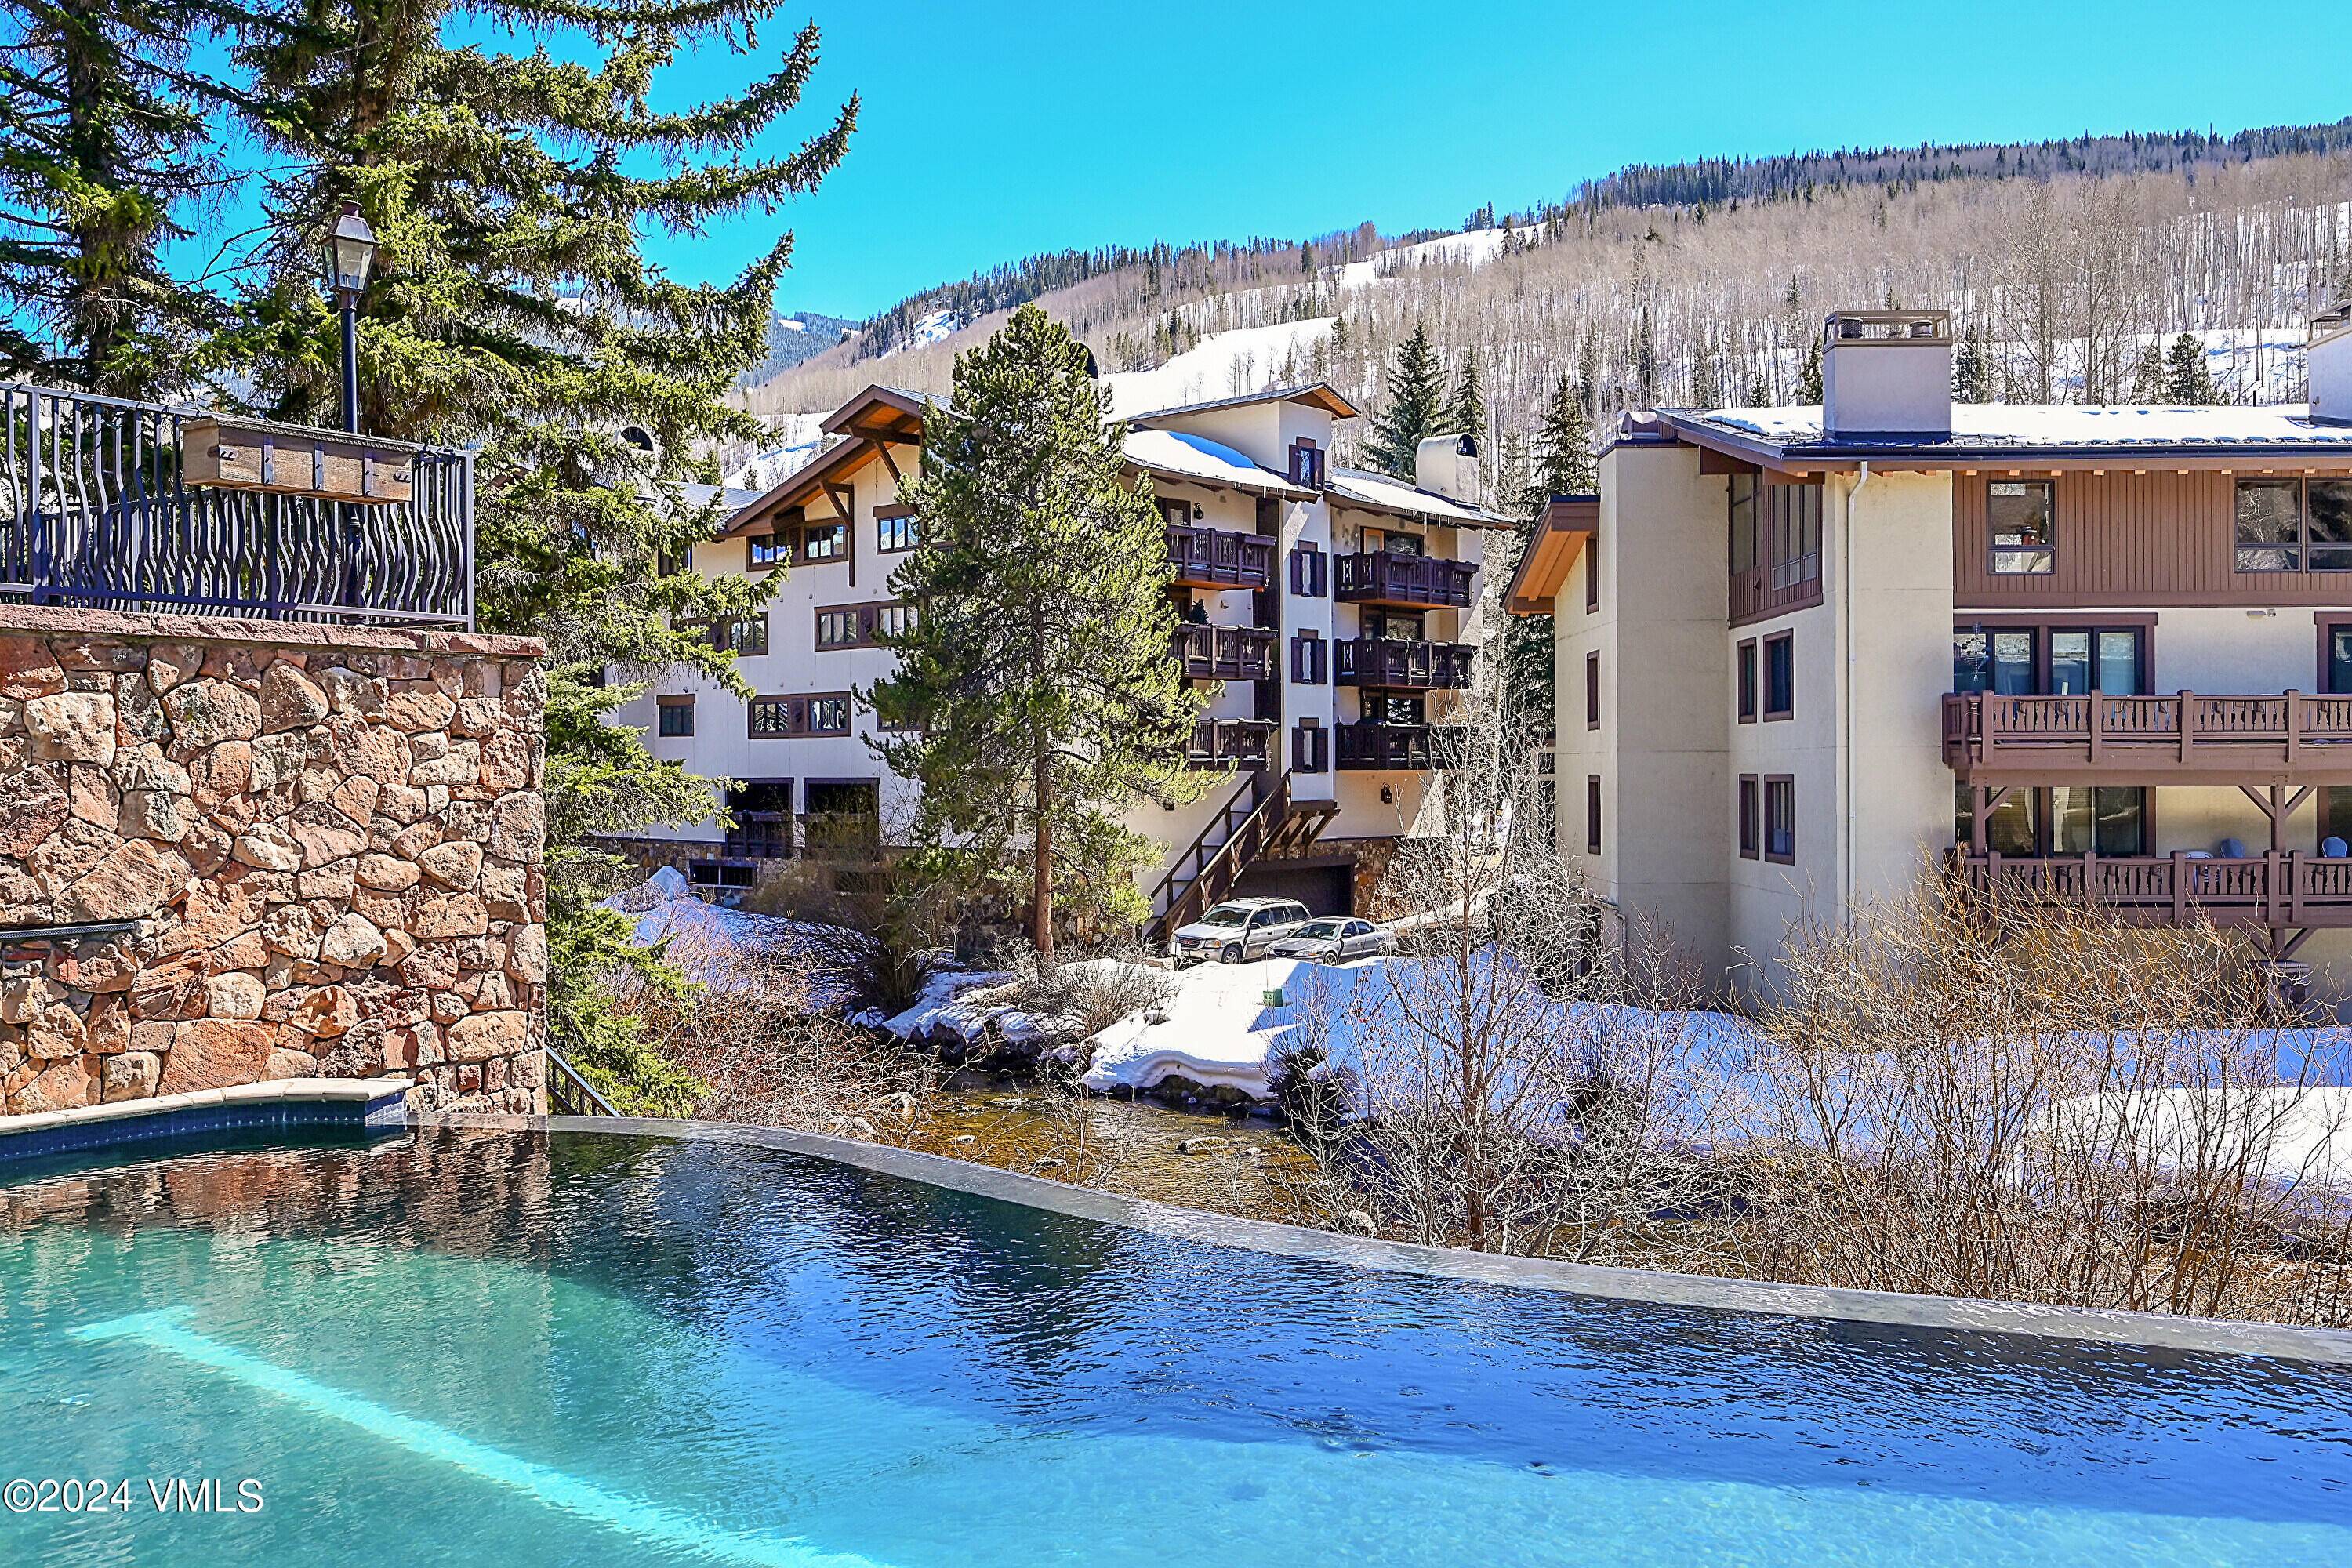 Immerse yourself into all of Vail's finest residential attributes with this elegant old charm.